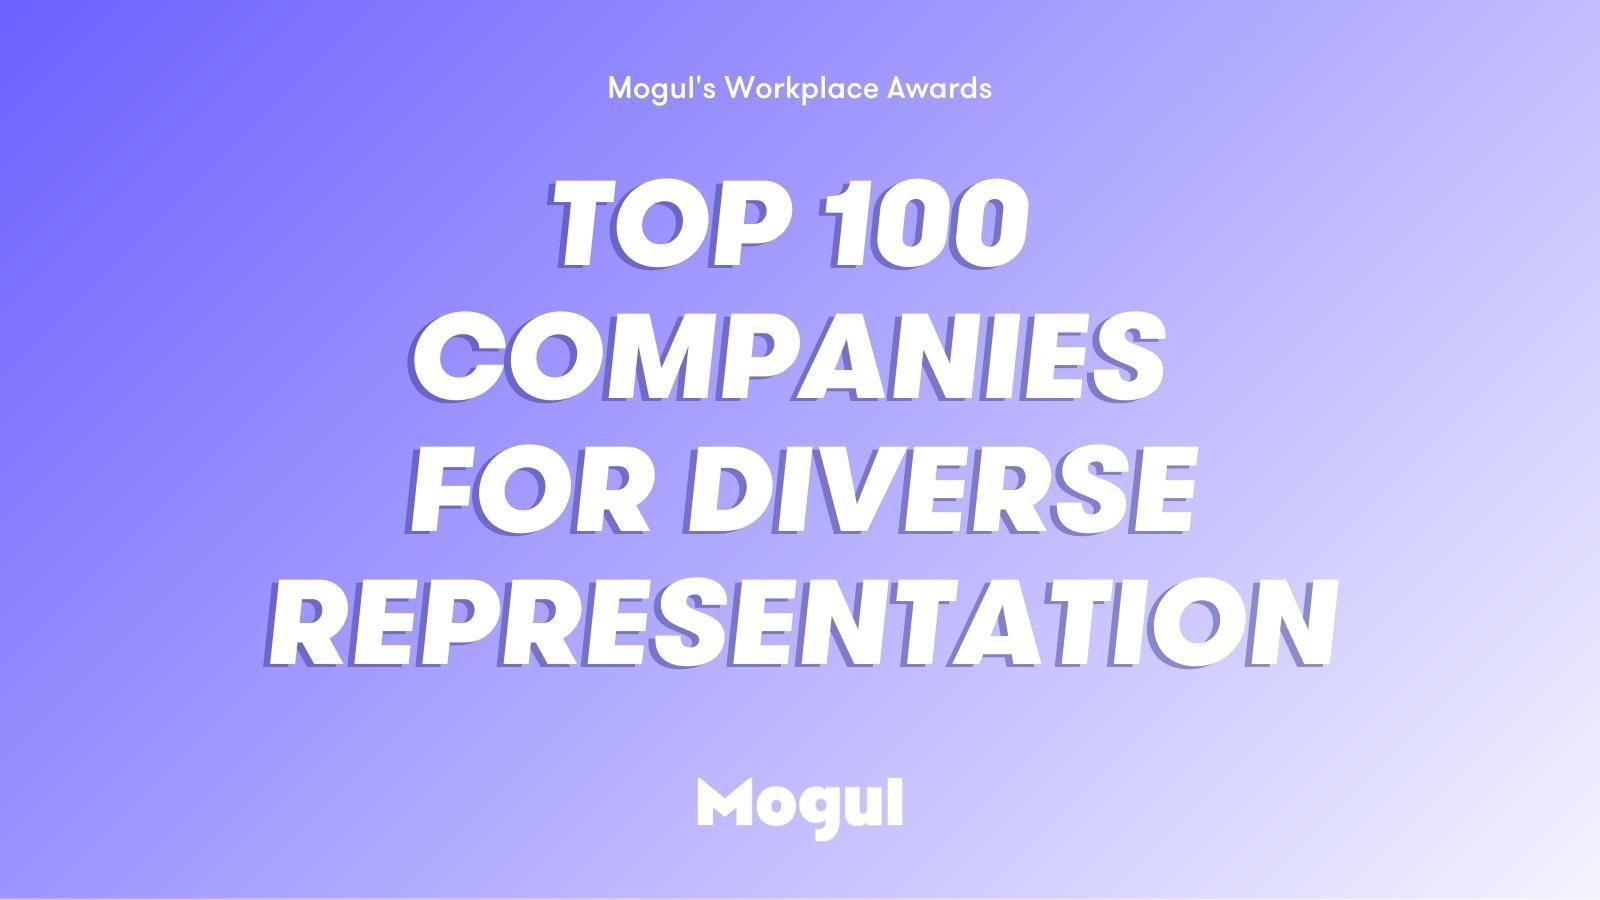 Top 100 Workplaces For Diverse Representation in 2022